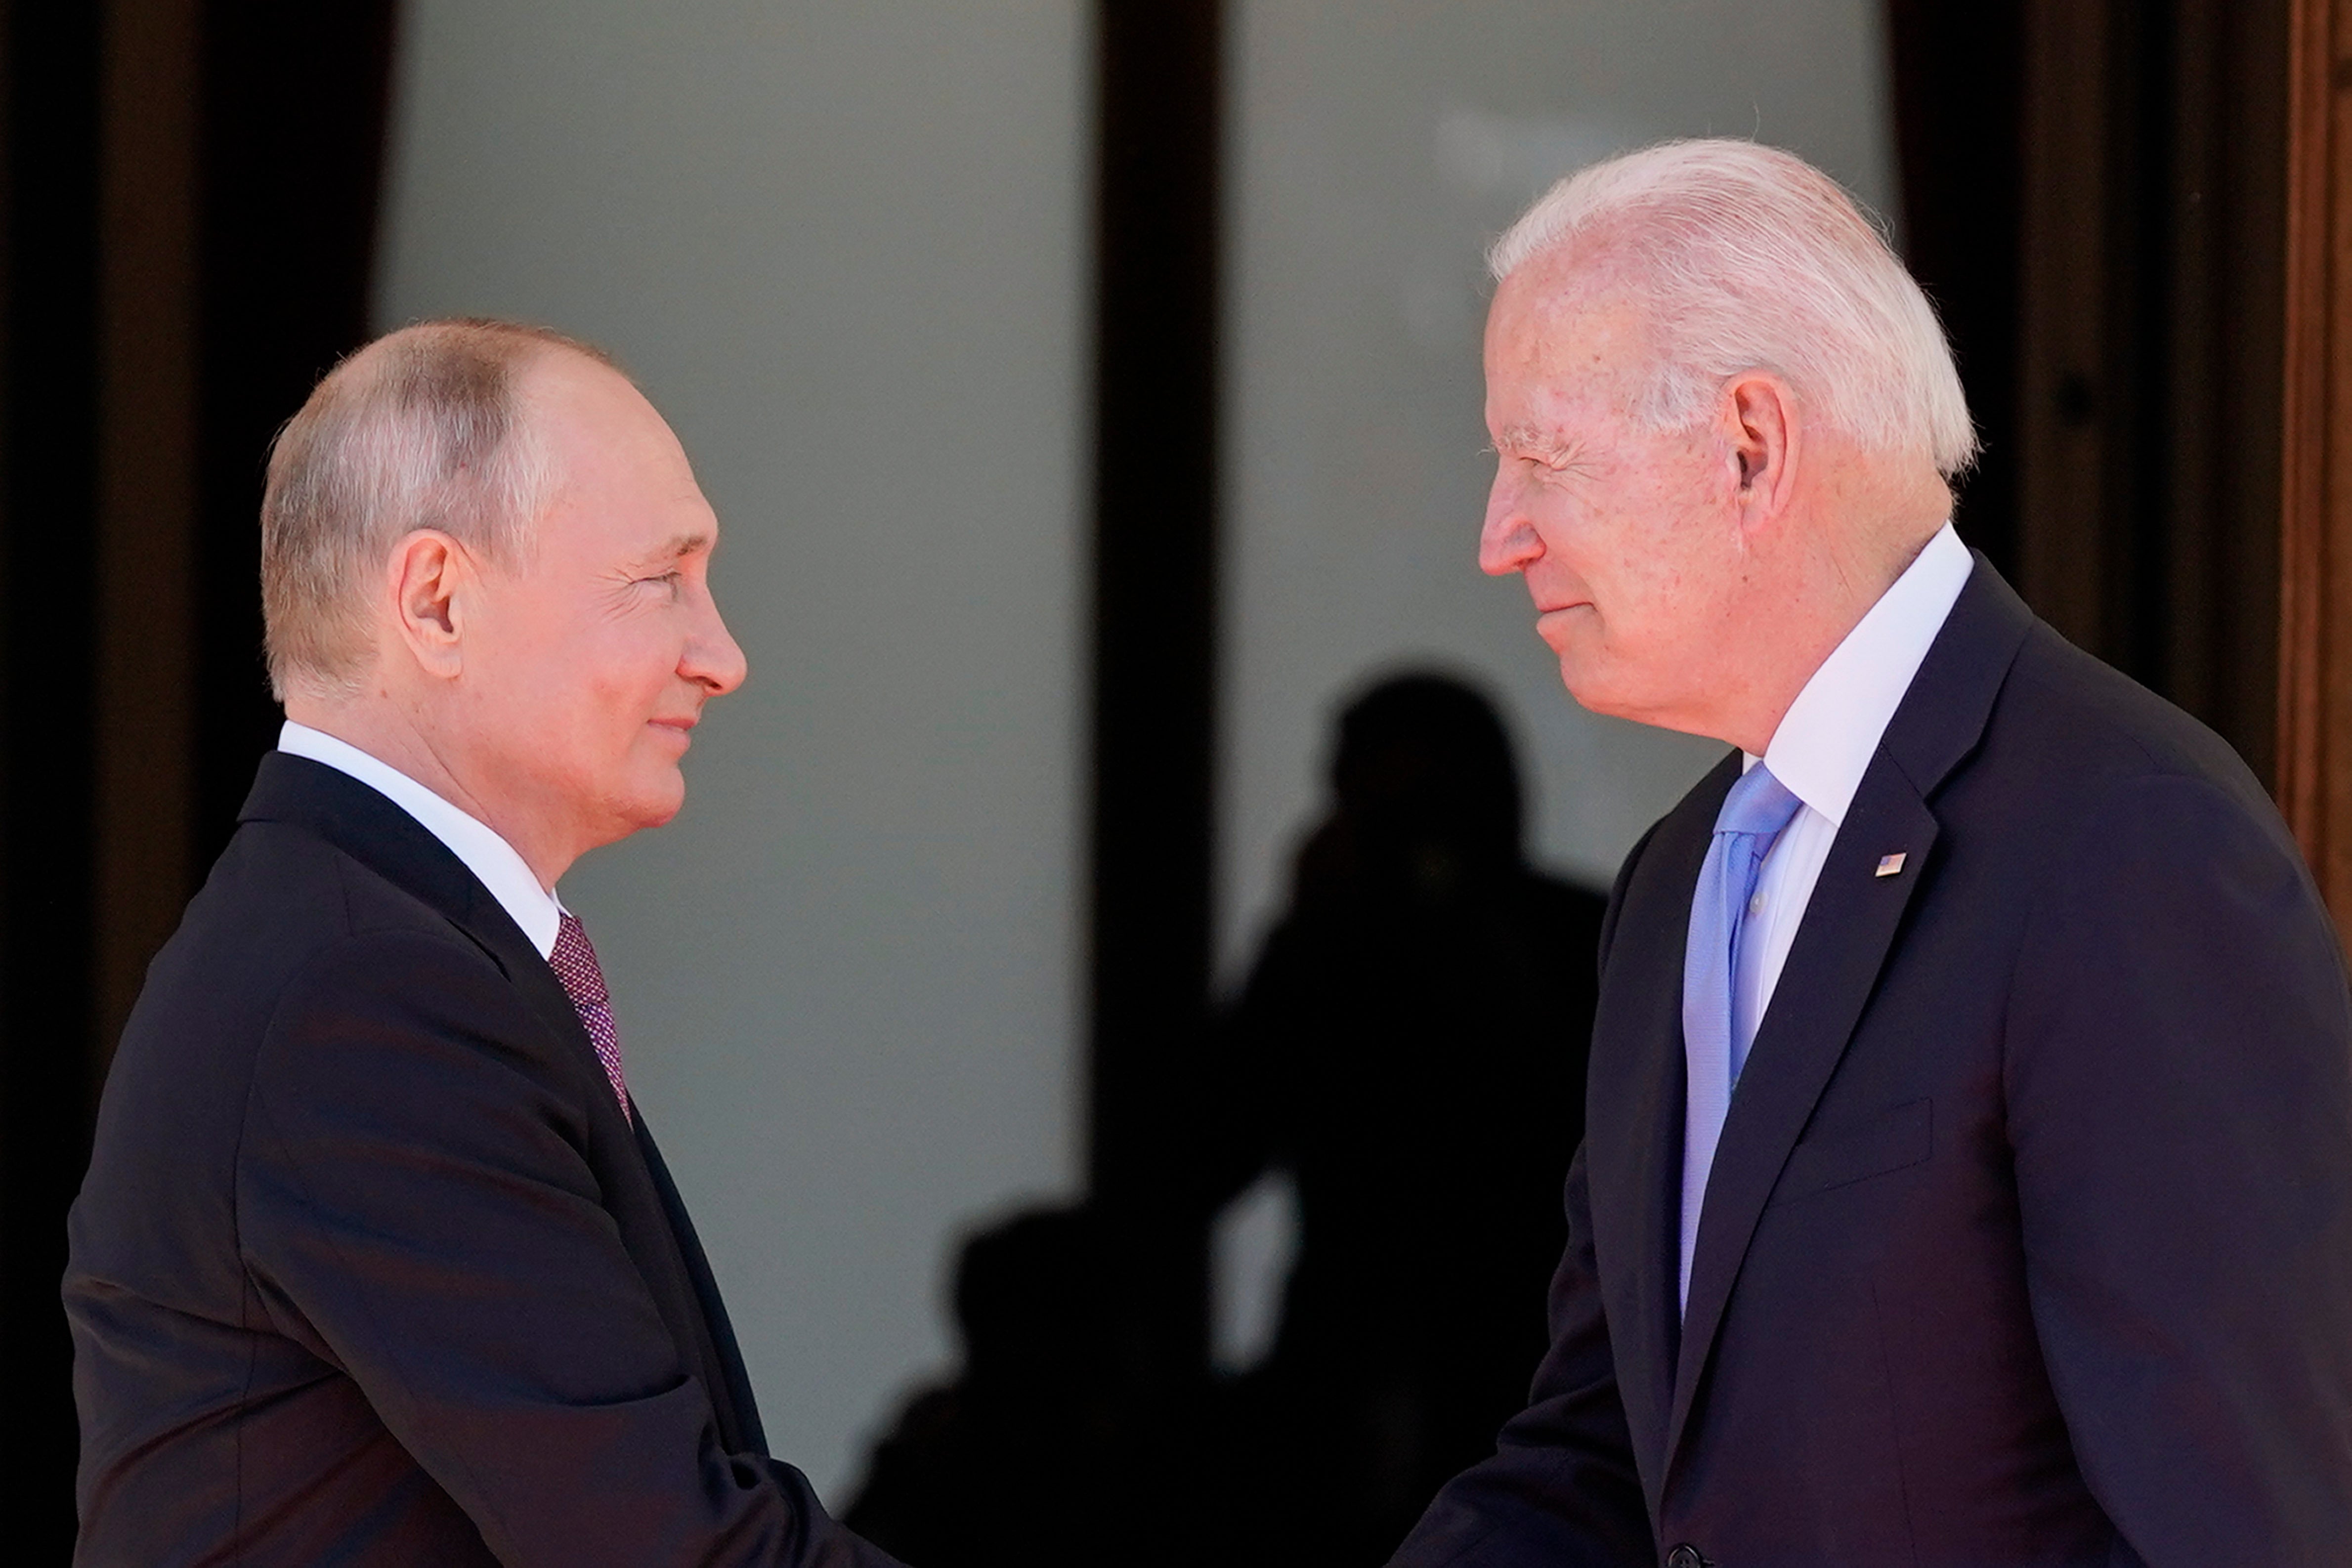 The information about Putin was reportedly shared with Biden and his top officials